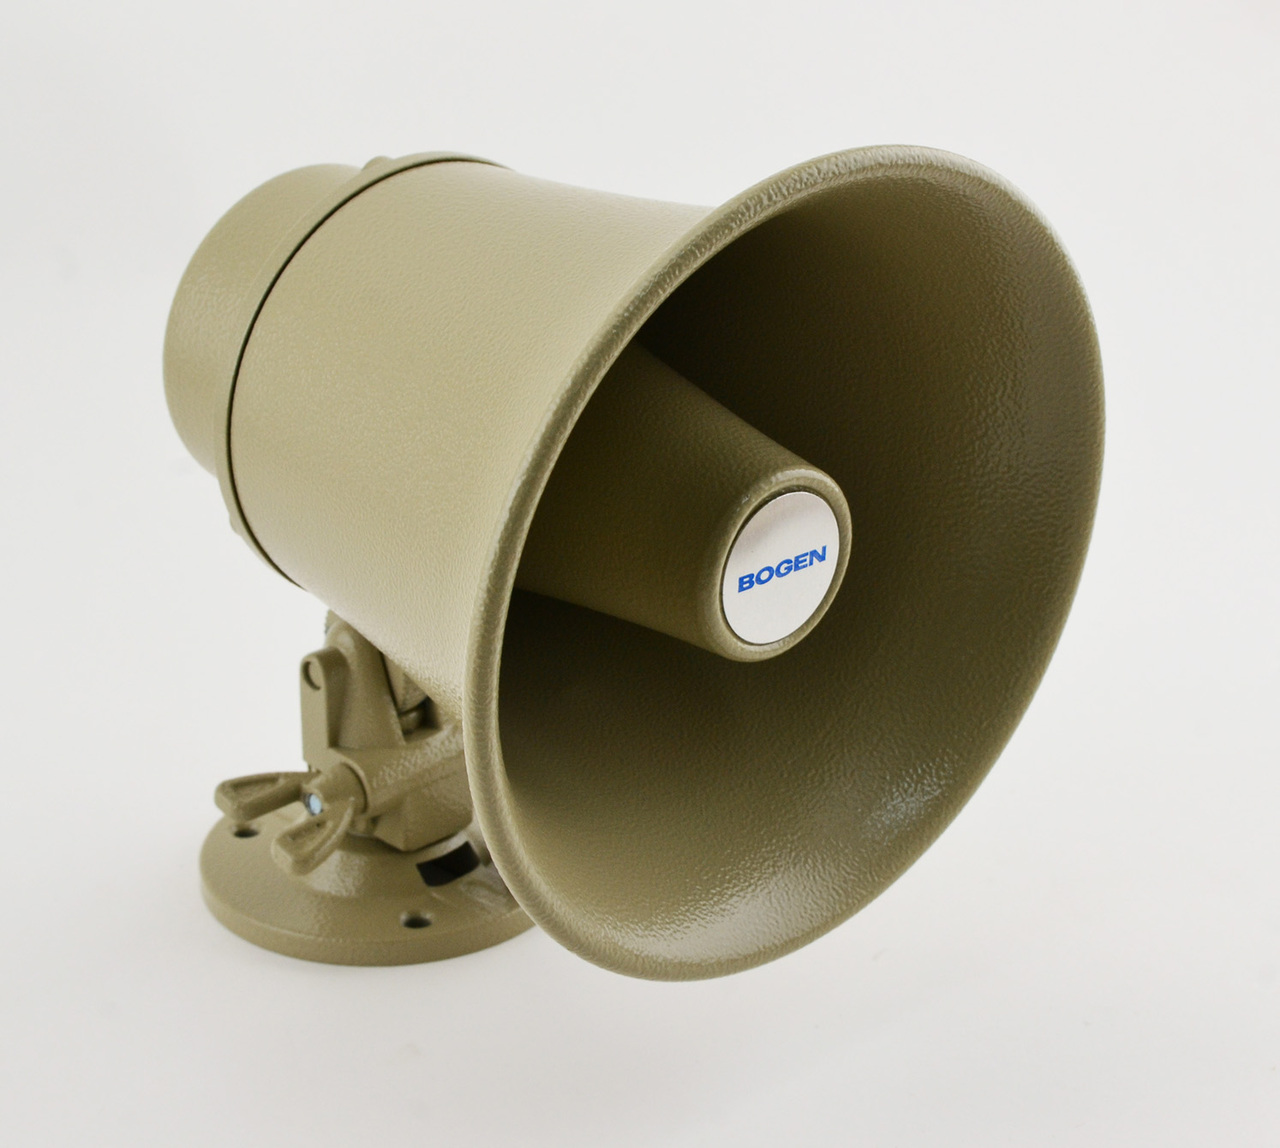 OUTDOOR MICROPHONE SPEAKER HORN, Fits 3M Image